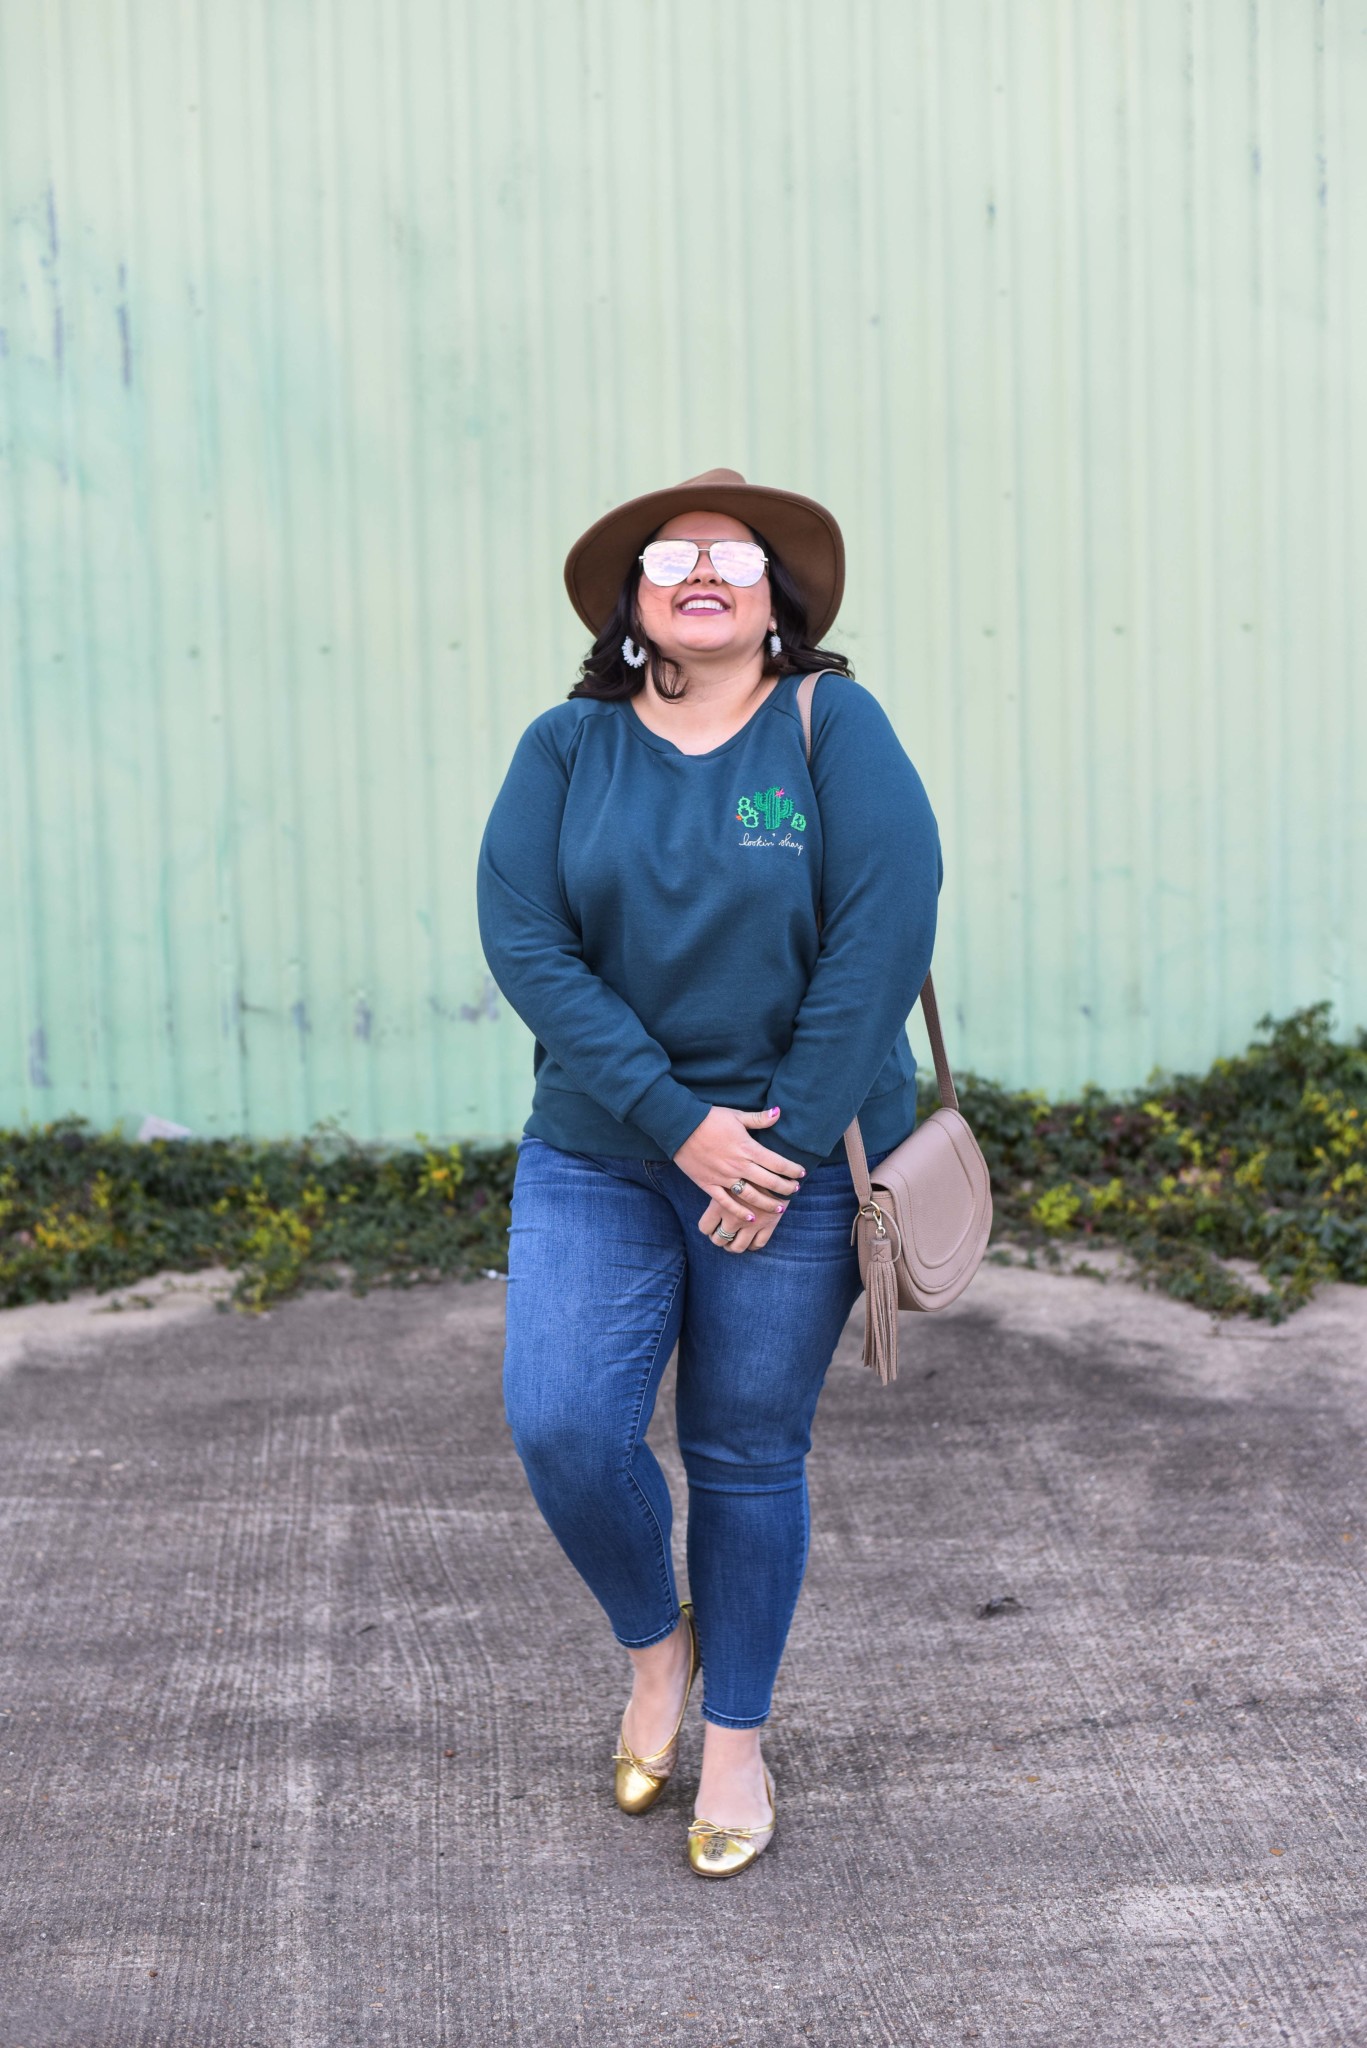 The Ori Embroidered Sweatshirt is one of the comfiest items I have ever worn. And the embroidery adds an extra hint of glam for a day out.